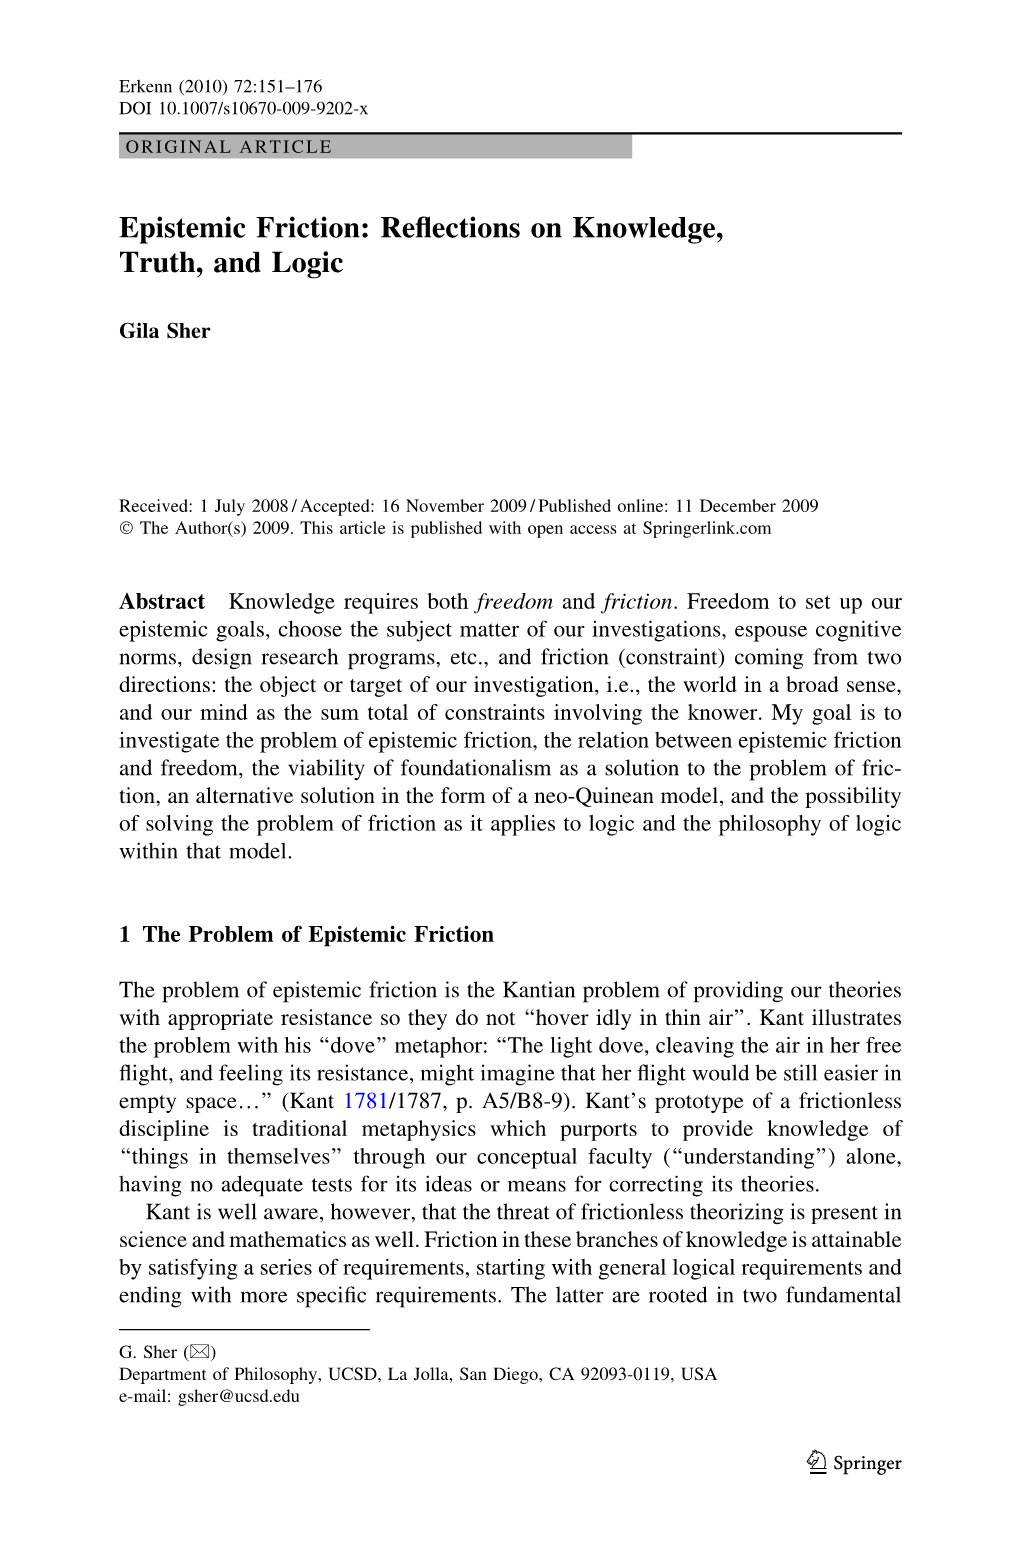 Epistemic Friction: Reﬂections on Knowledge, Truth, and Logic